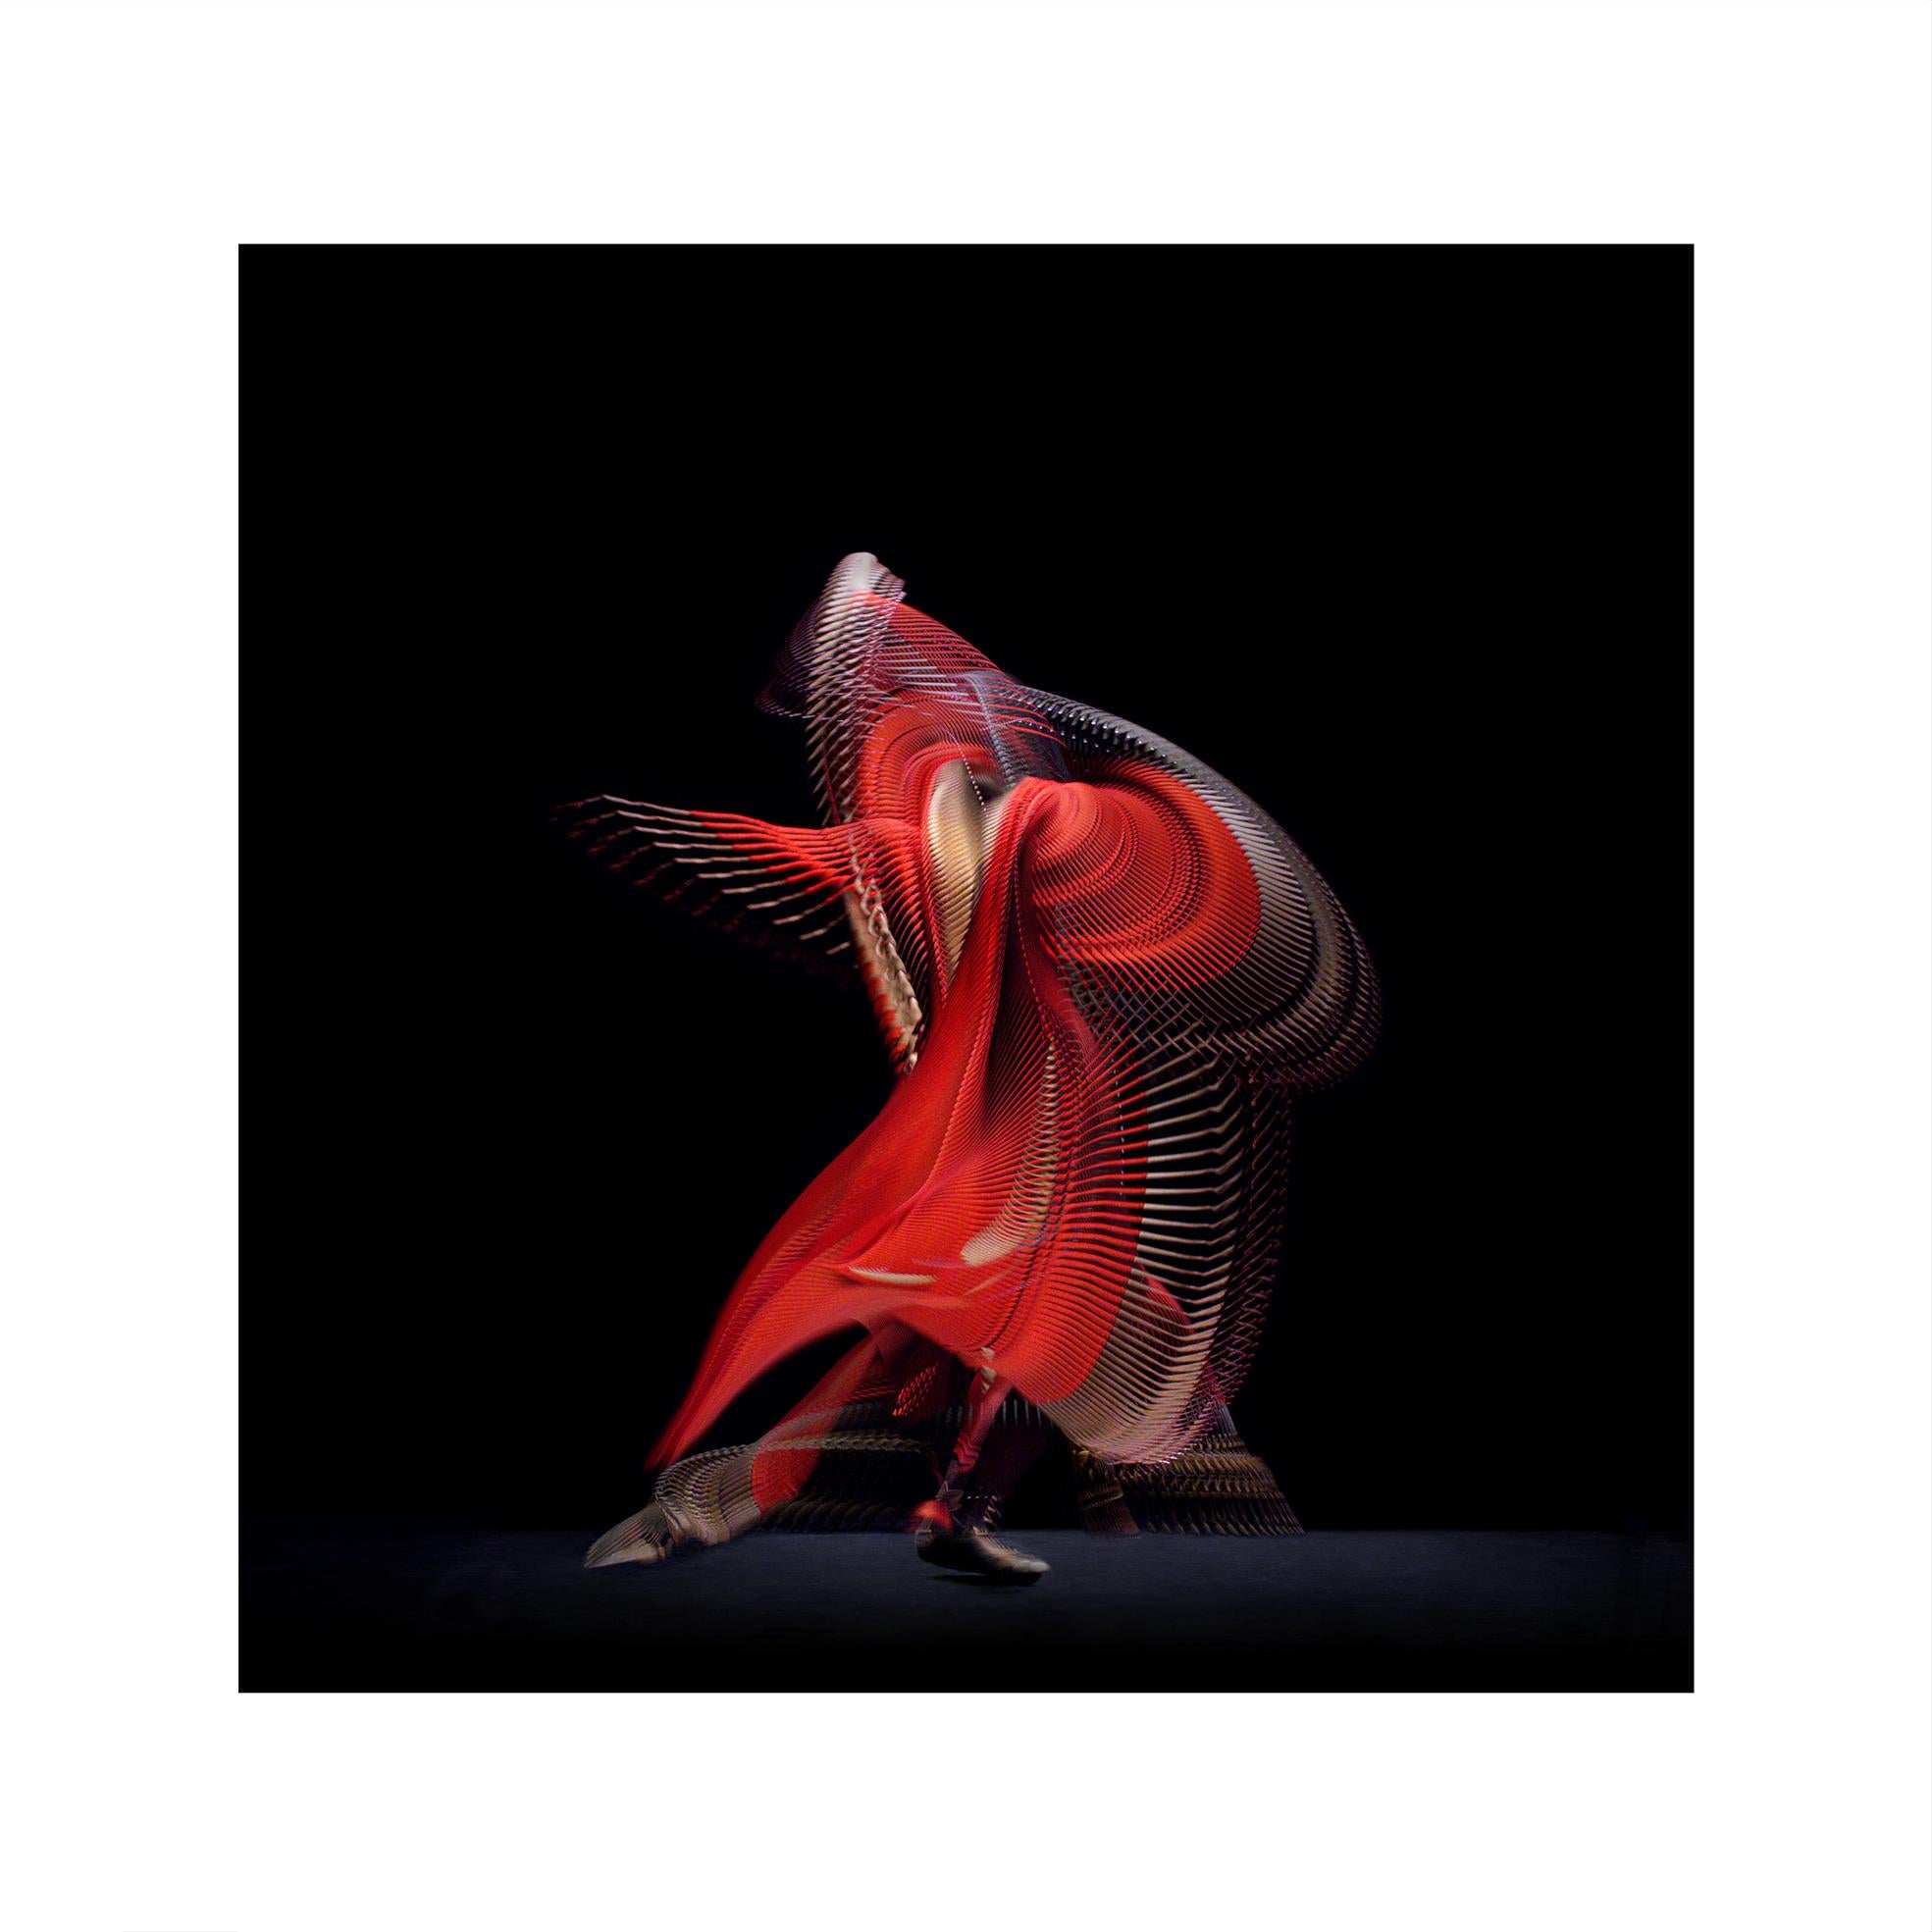 Abstract Dancers, Red 3, 2019 by Giles Revell - Photography, Print, Ballet